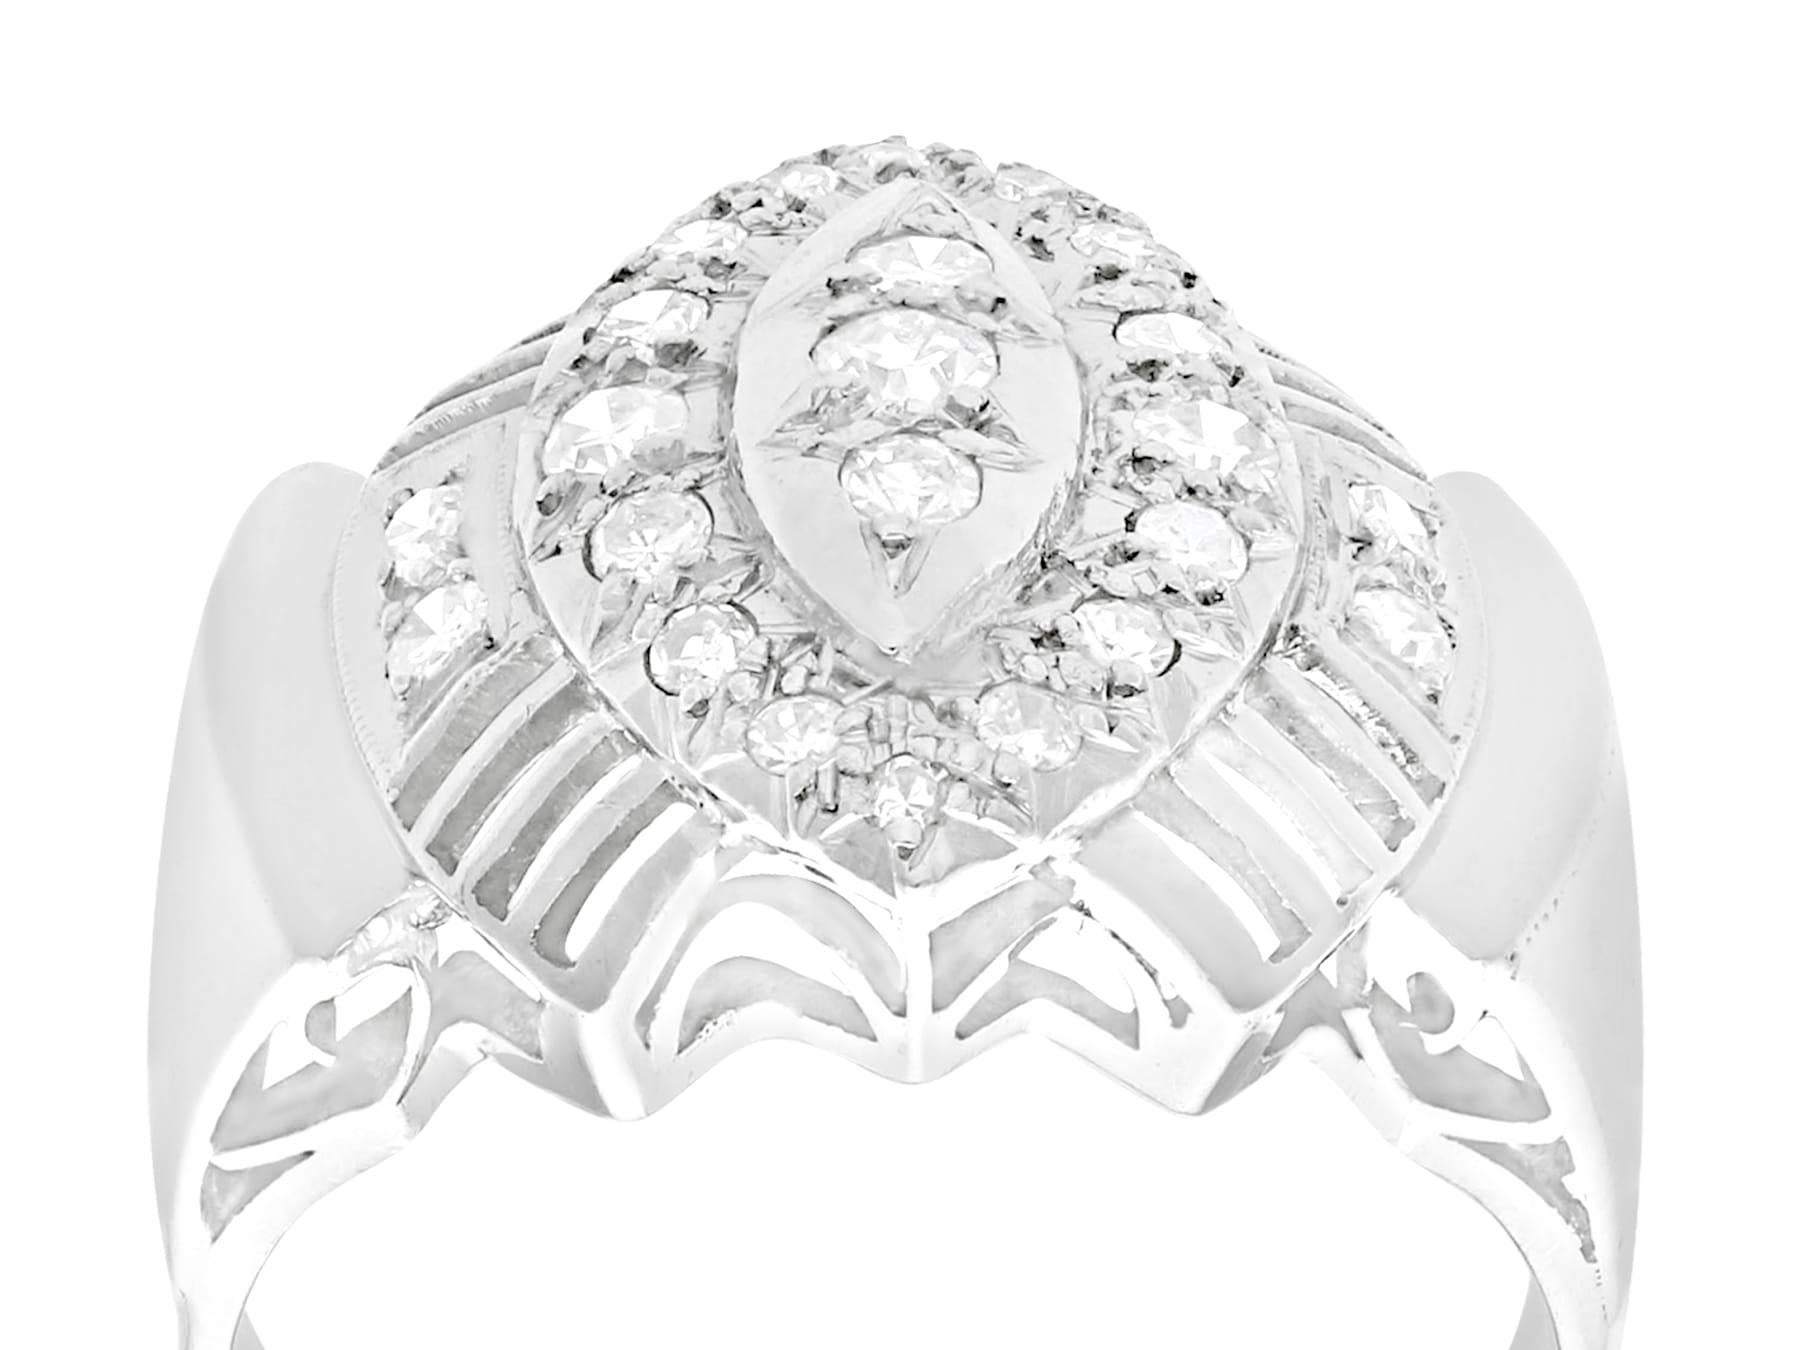 An impressive Art Deco 0.65 carat diamond and 18 karat white gold cocktail ring; part of our diverse vintage jewelry and estate jewelry collections.

This fine and impressive diamond cocktail ring has been crafted in 18k white gold.

The pierced